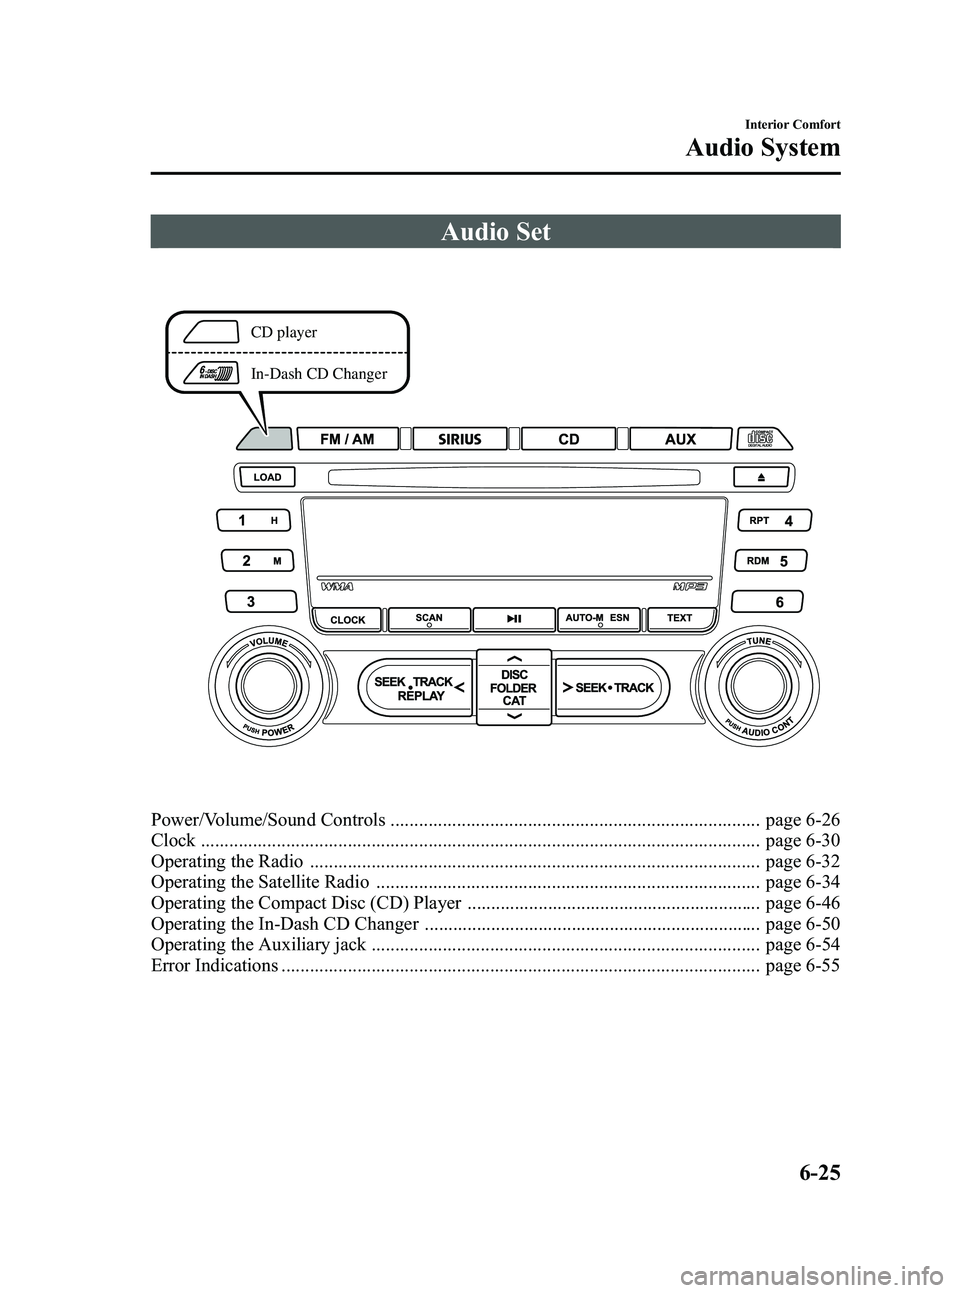 MAZDA MODEL MX-5 MIATA 2010  Owners Manual Black plate (243,1)
Audio Set
CD player
In-Dash CD Changer
Power/Volume/Sound Controls .............................................................................. page 6-26
Clock ..................